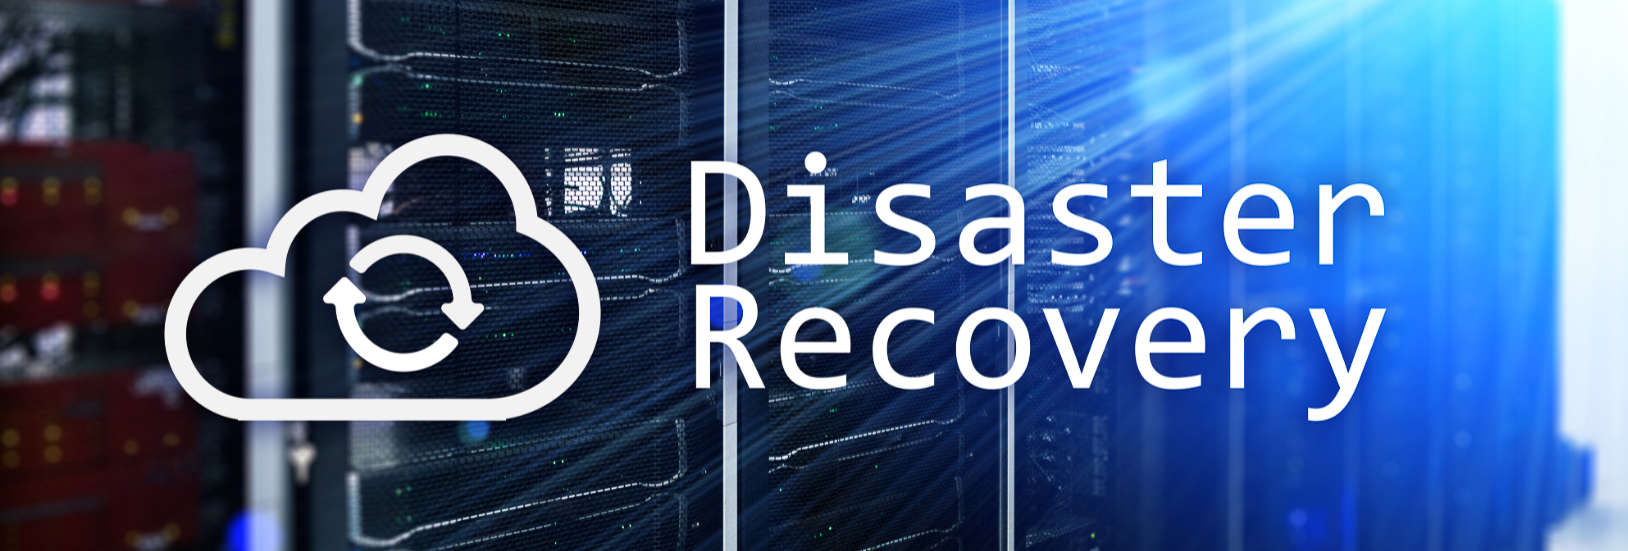 Disaster Recovery - Connect Cause